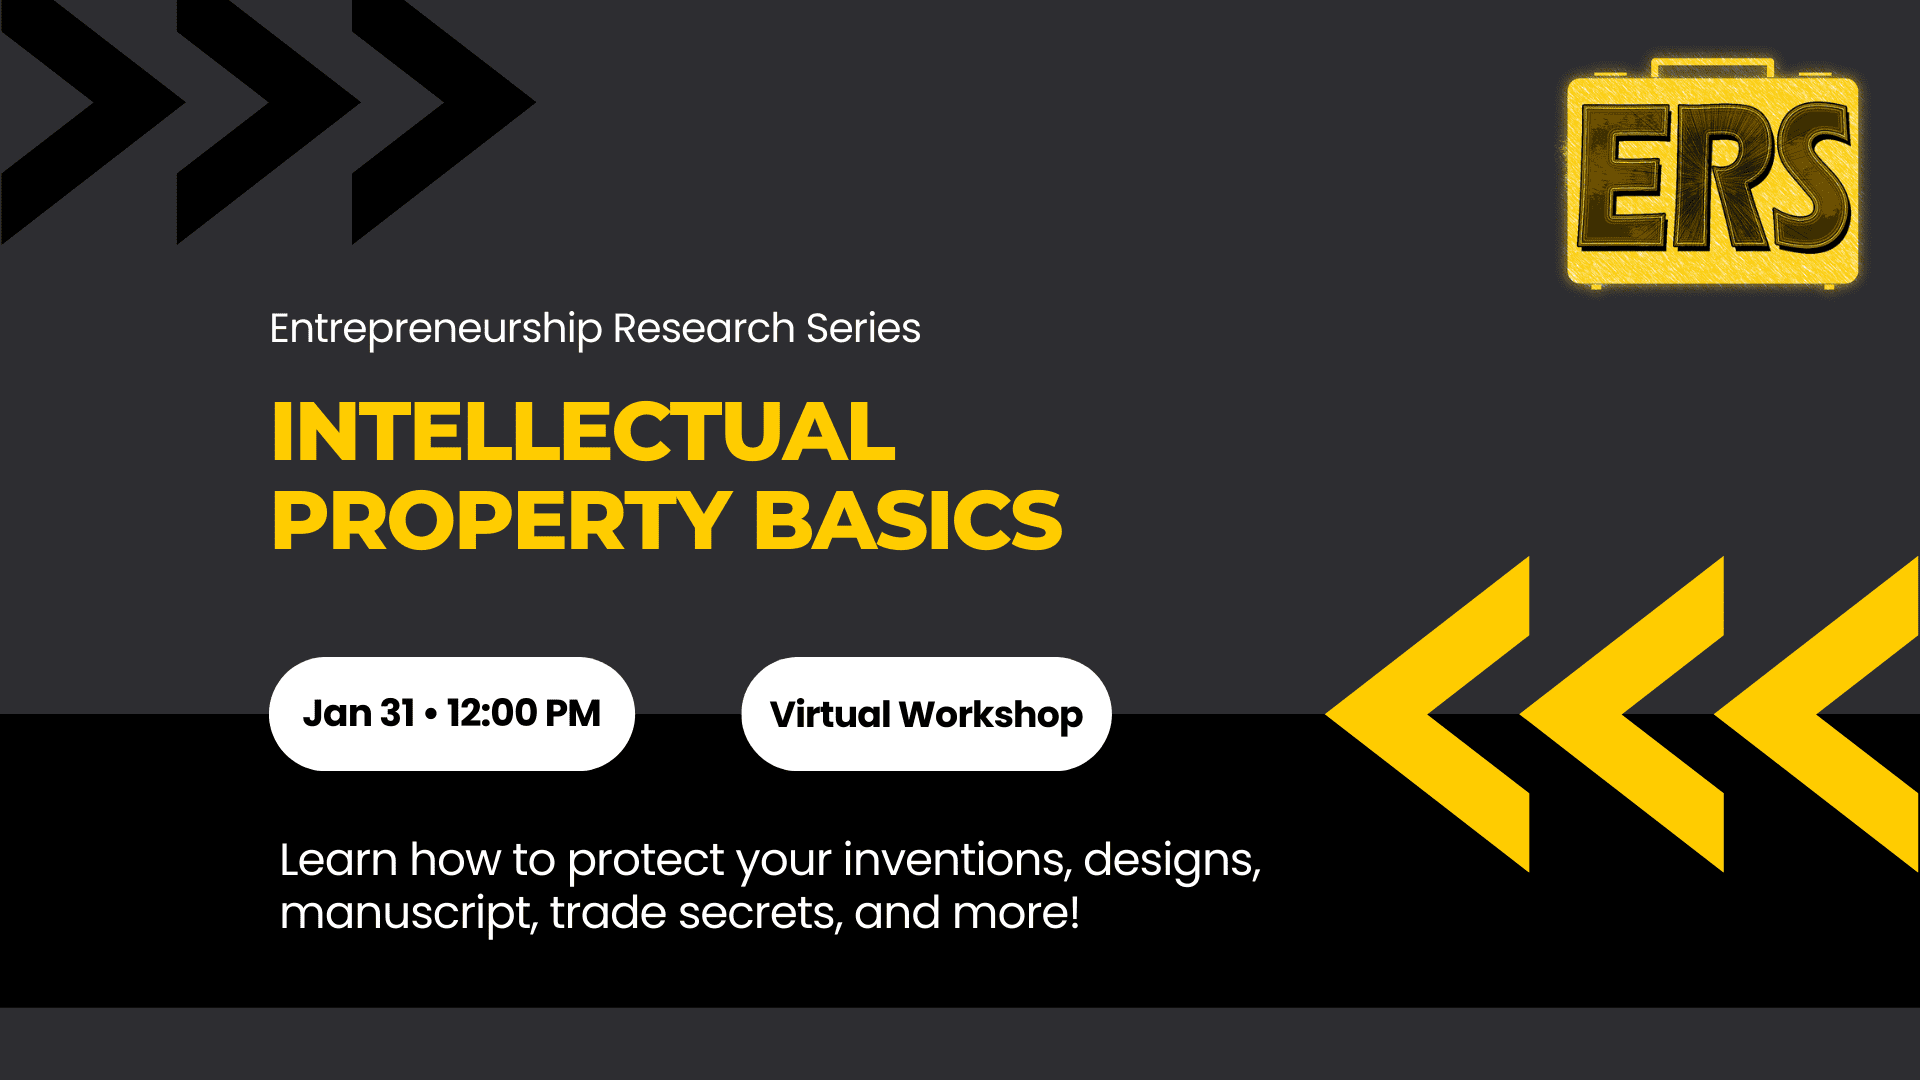 Entrepreneurship Research Series - Intellectual Property Basics - Learn how to protect your inventions, designs, manuscript, trade secrets, and more! Jan 31 • 12:00 PM Virtual Workshop